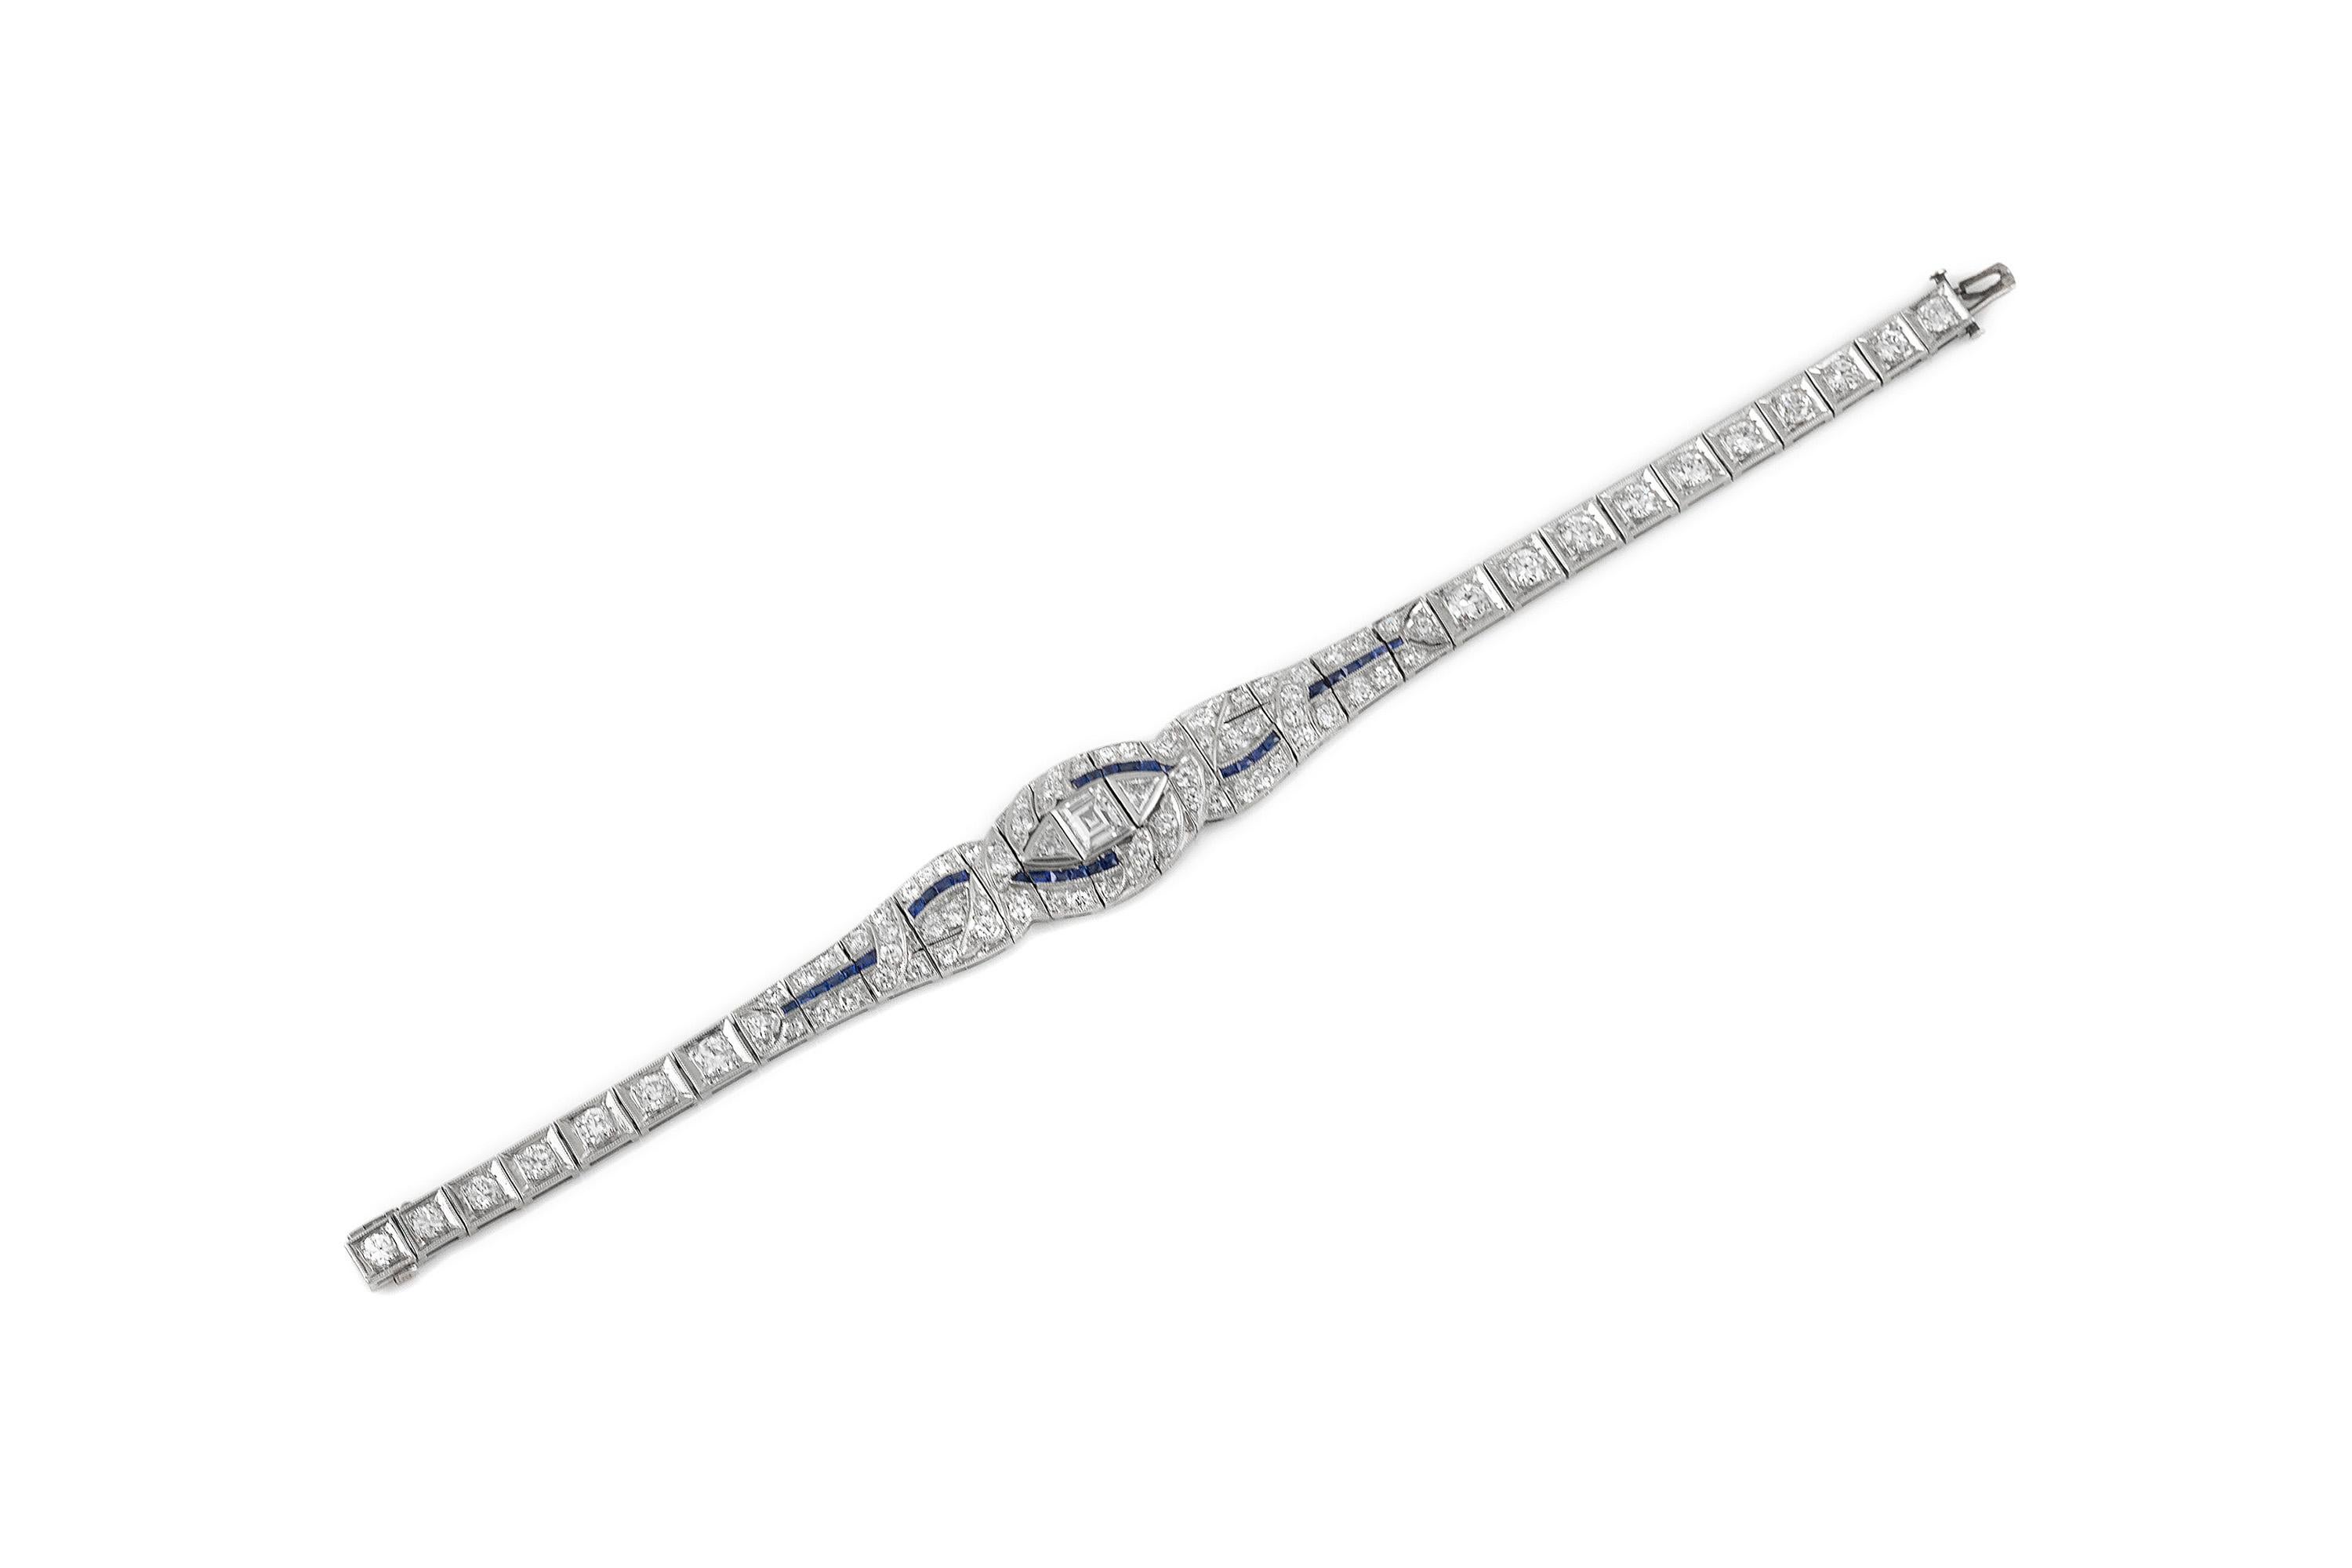 The bracelet is finely crafted in platinum with sapphires weighing approximately total of 1.00 and diamonds weighing approximately total of 7.00 carat.
Color G/H
Clarity VS1